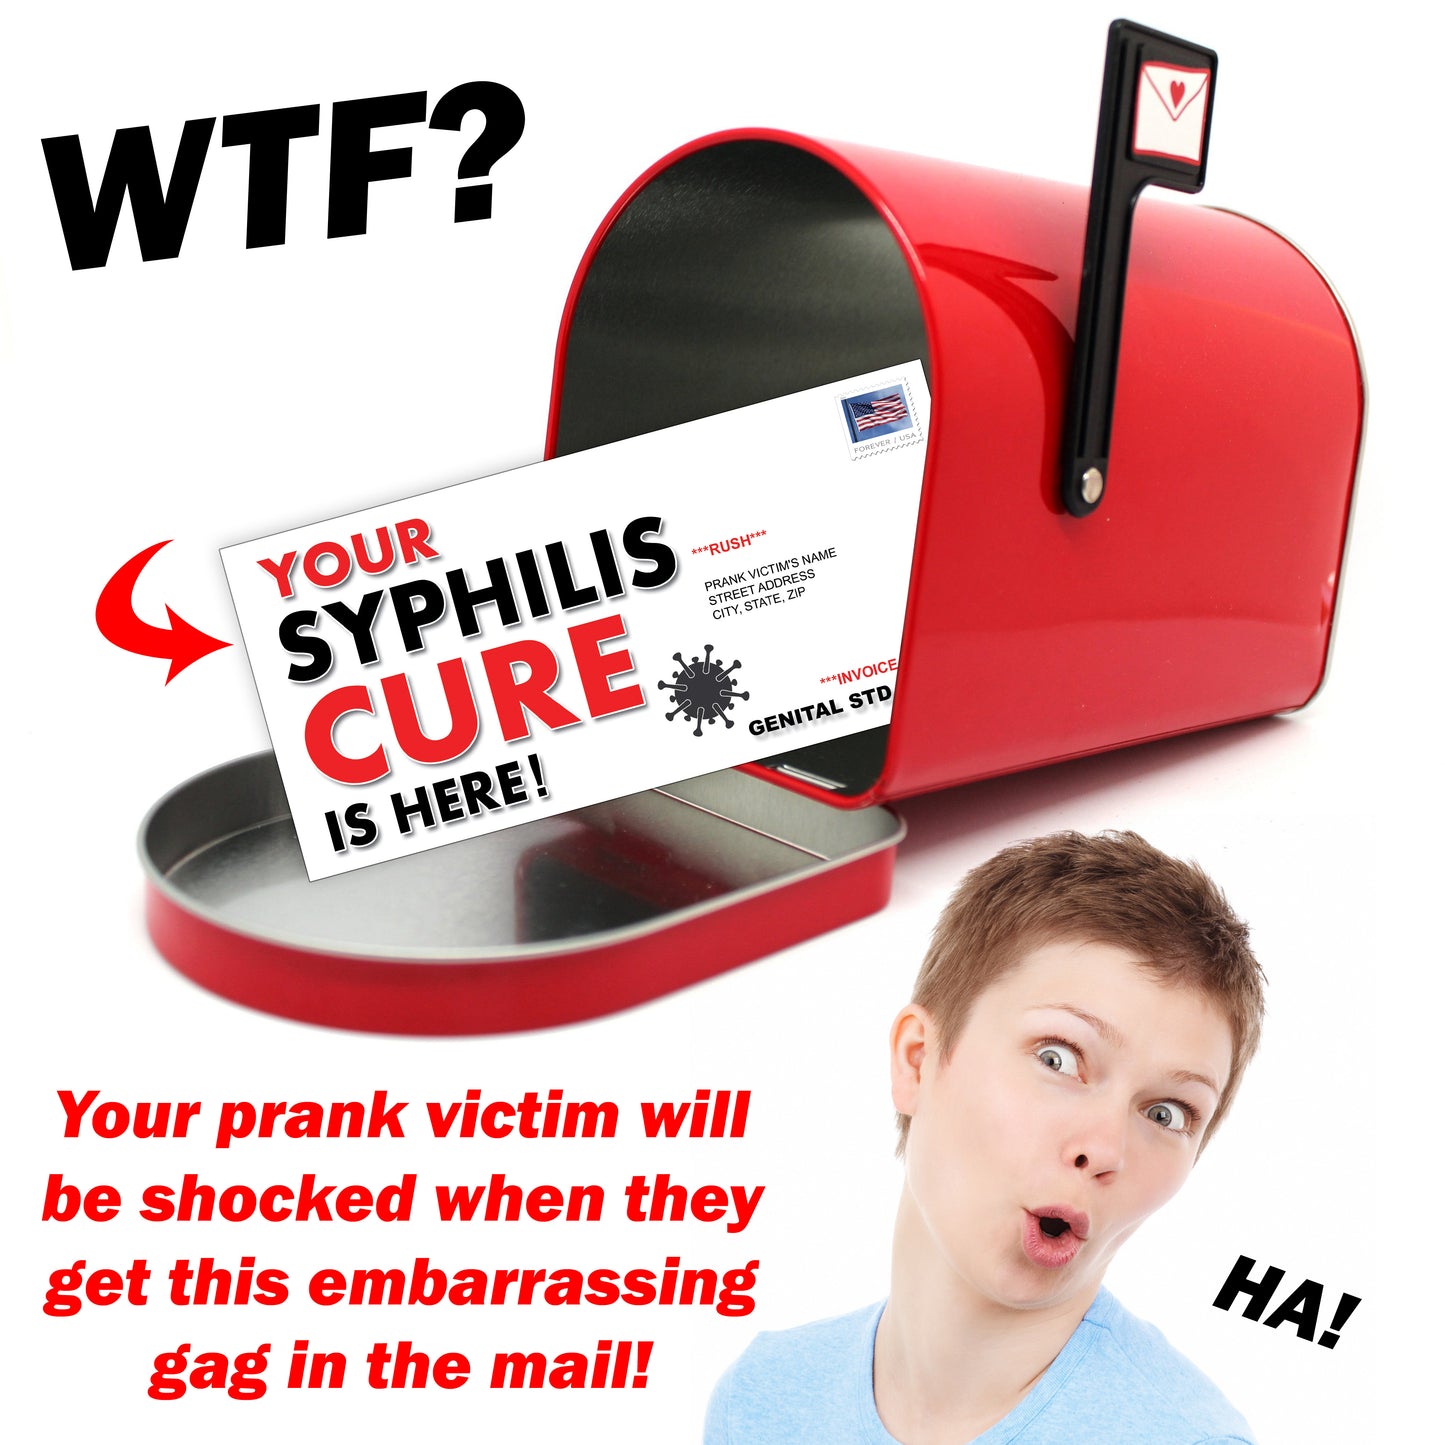 Syphilis Cure Anonymous Mail Prank Letter